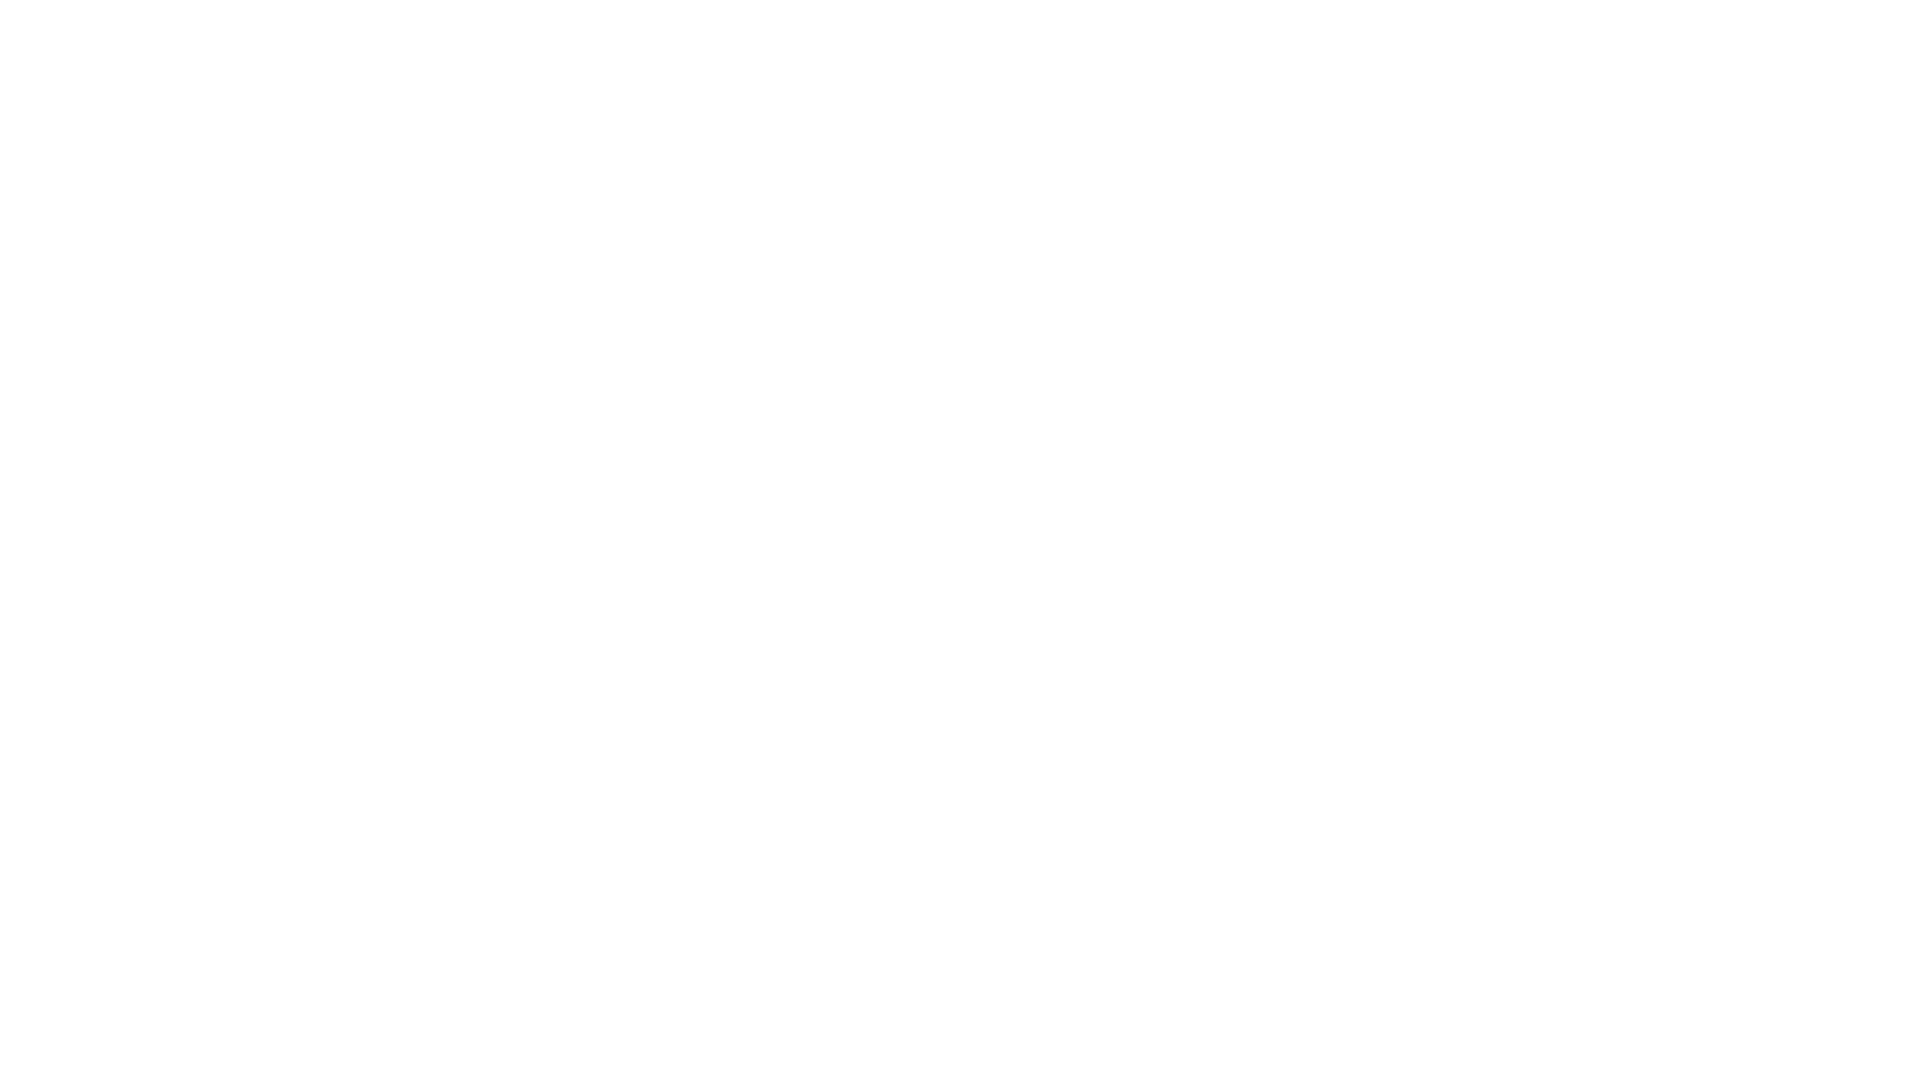 Newsletter sign up pic